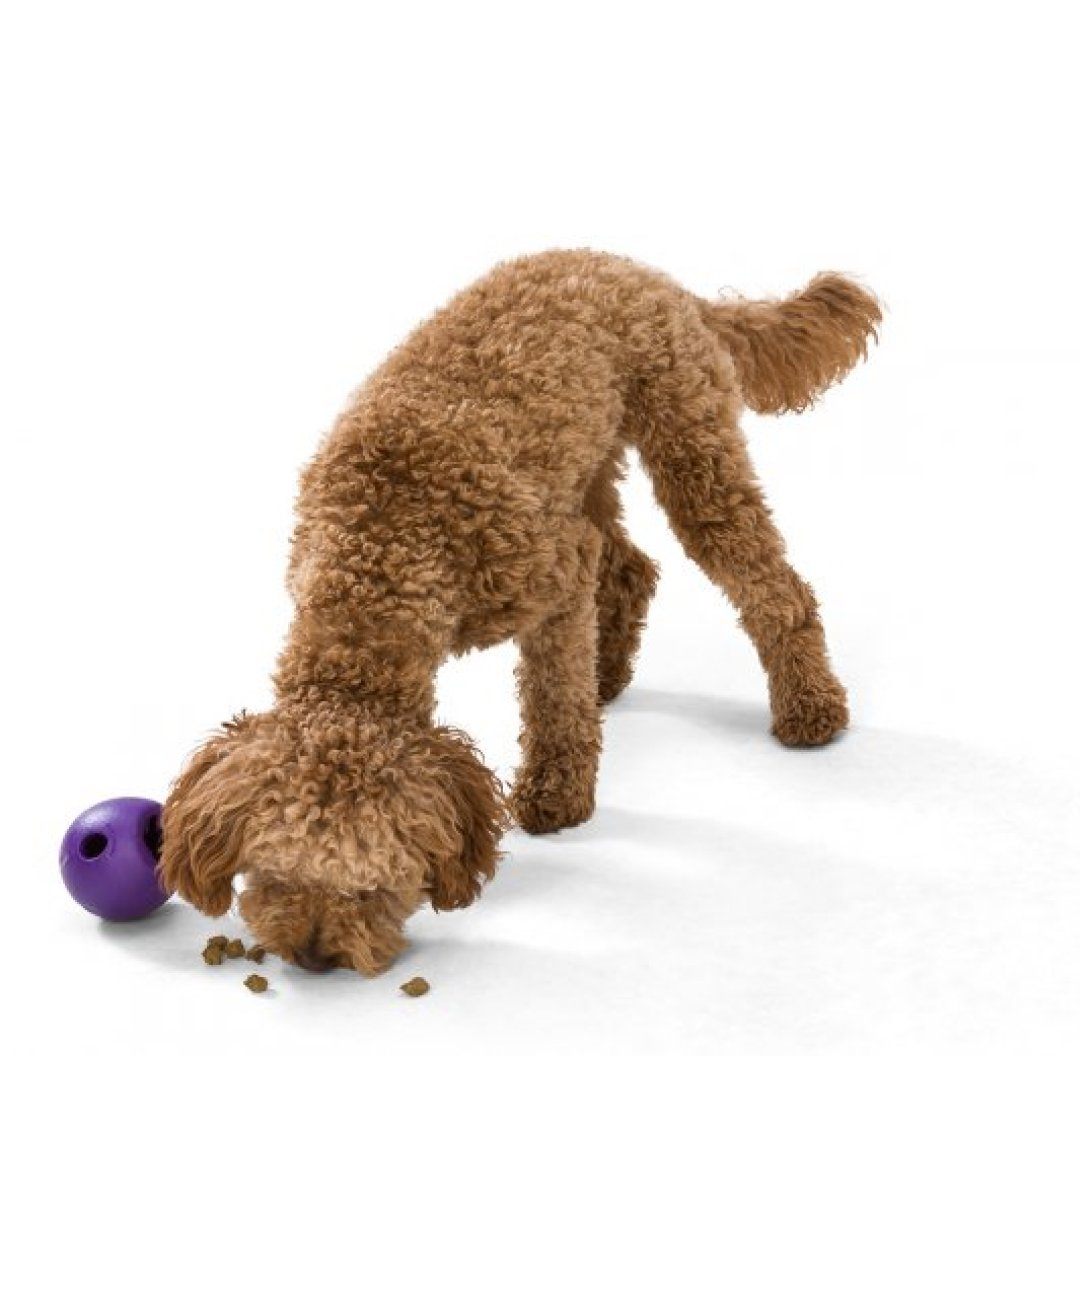 West Paw Rumbl Treat Dog Toy Puzzle Toy Rover 